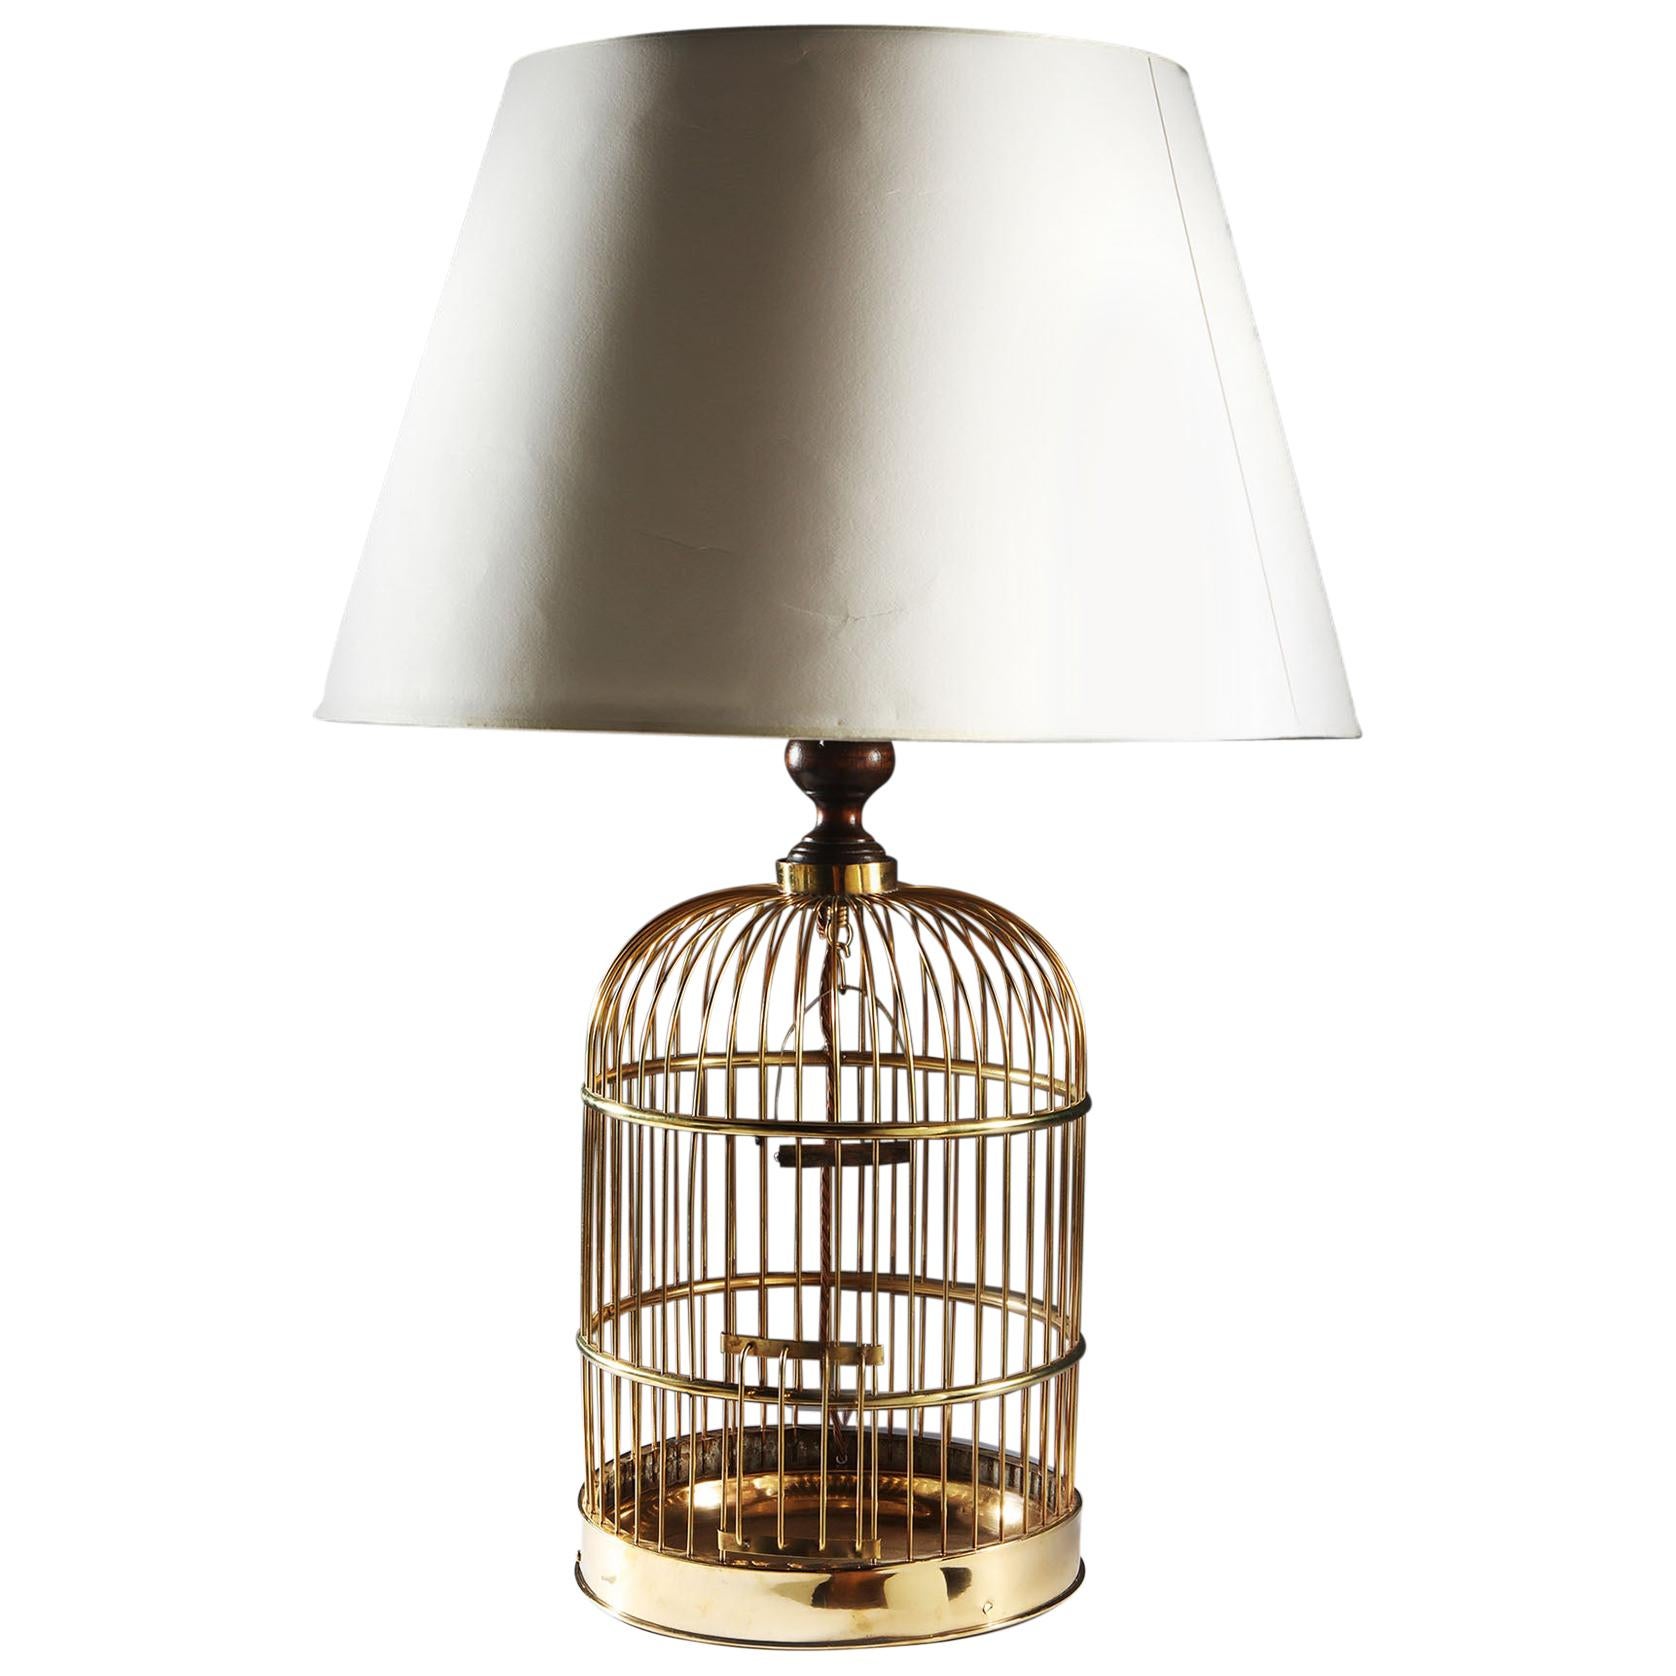 Edwardian English Brass Metal Birdcage as a Table Lamp, with Mahogany Neck